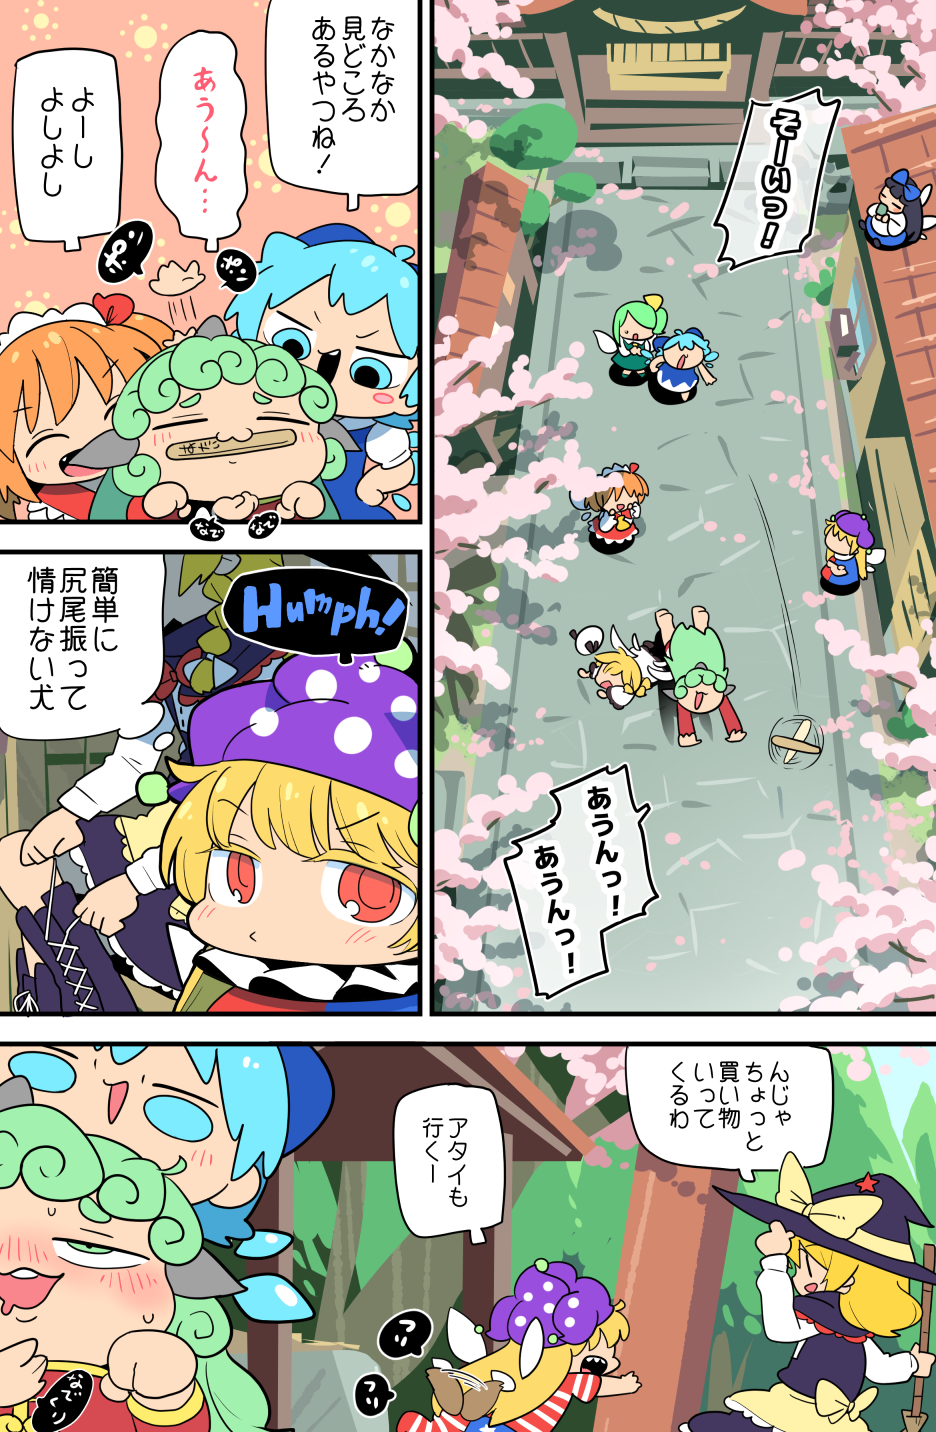 6+girls all_fours american_flag_shirt architecture black_hair blonde_hair blue_hair blue_vest boots bow chibi cirno clownpiece comic daiyousei east_asian_architecture fairy_wings green_hair hair_bow hat hat_loss highres jester_cap kirisame_marisa knee_boots komano_aun legs_crossed long_hair long_sleeves luna_child mouth_hold moyazou_(kitaguni_moyashi_seizoujo) multiple_girls on_roof petting puffy_short_sleeves puffy_sleeves red_eyes red_hair shirt short_hair short_sleeves shrine sitting standing star_sapphire stepped_on stick stone_wall sunny_milk tail_wagging throwing touhou translation_request tying very_long_hair vest wall white_shirt wings witch_hat